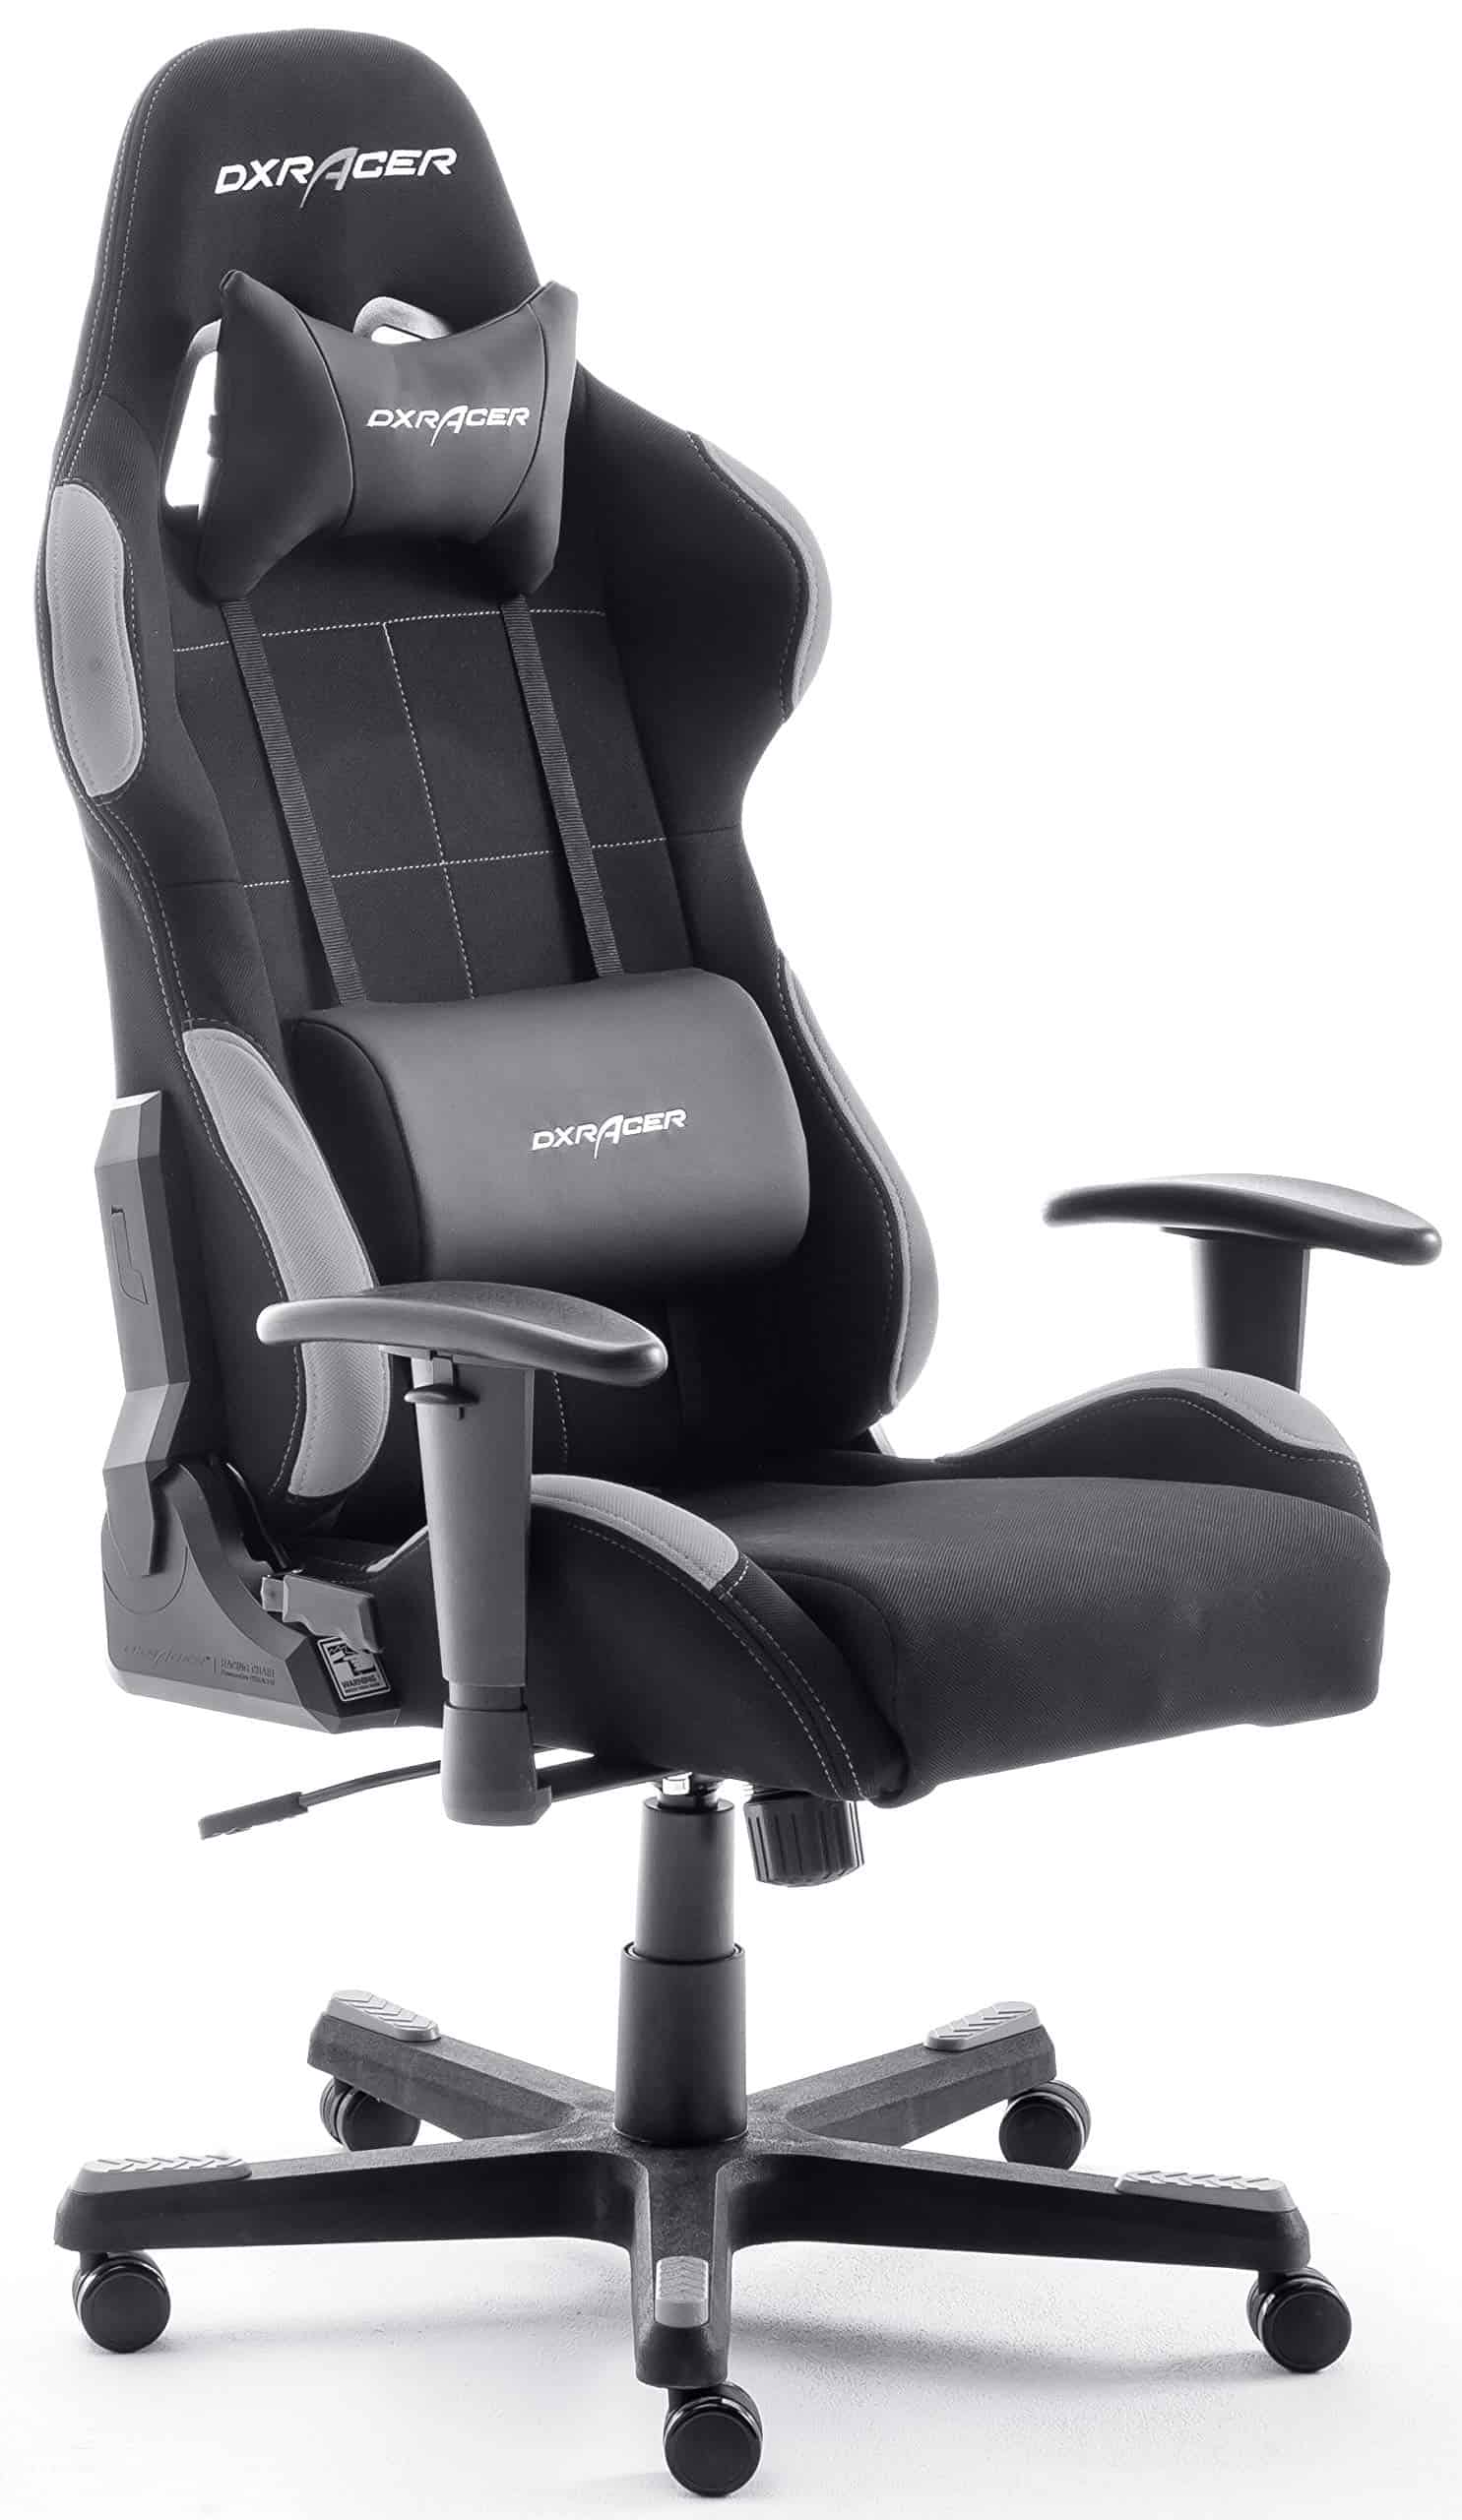 Dx Racer 5 silla gaming